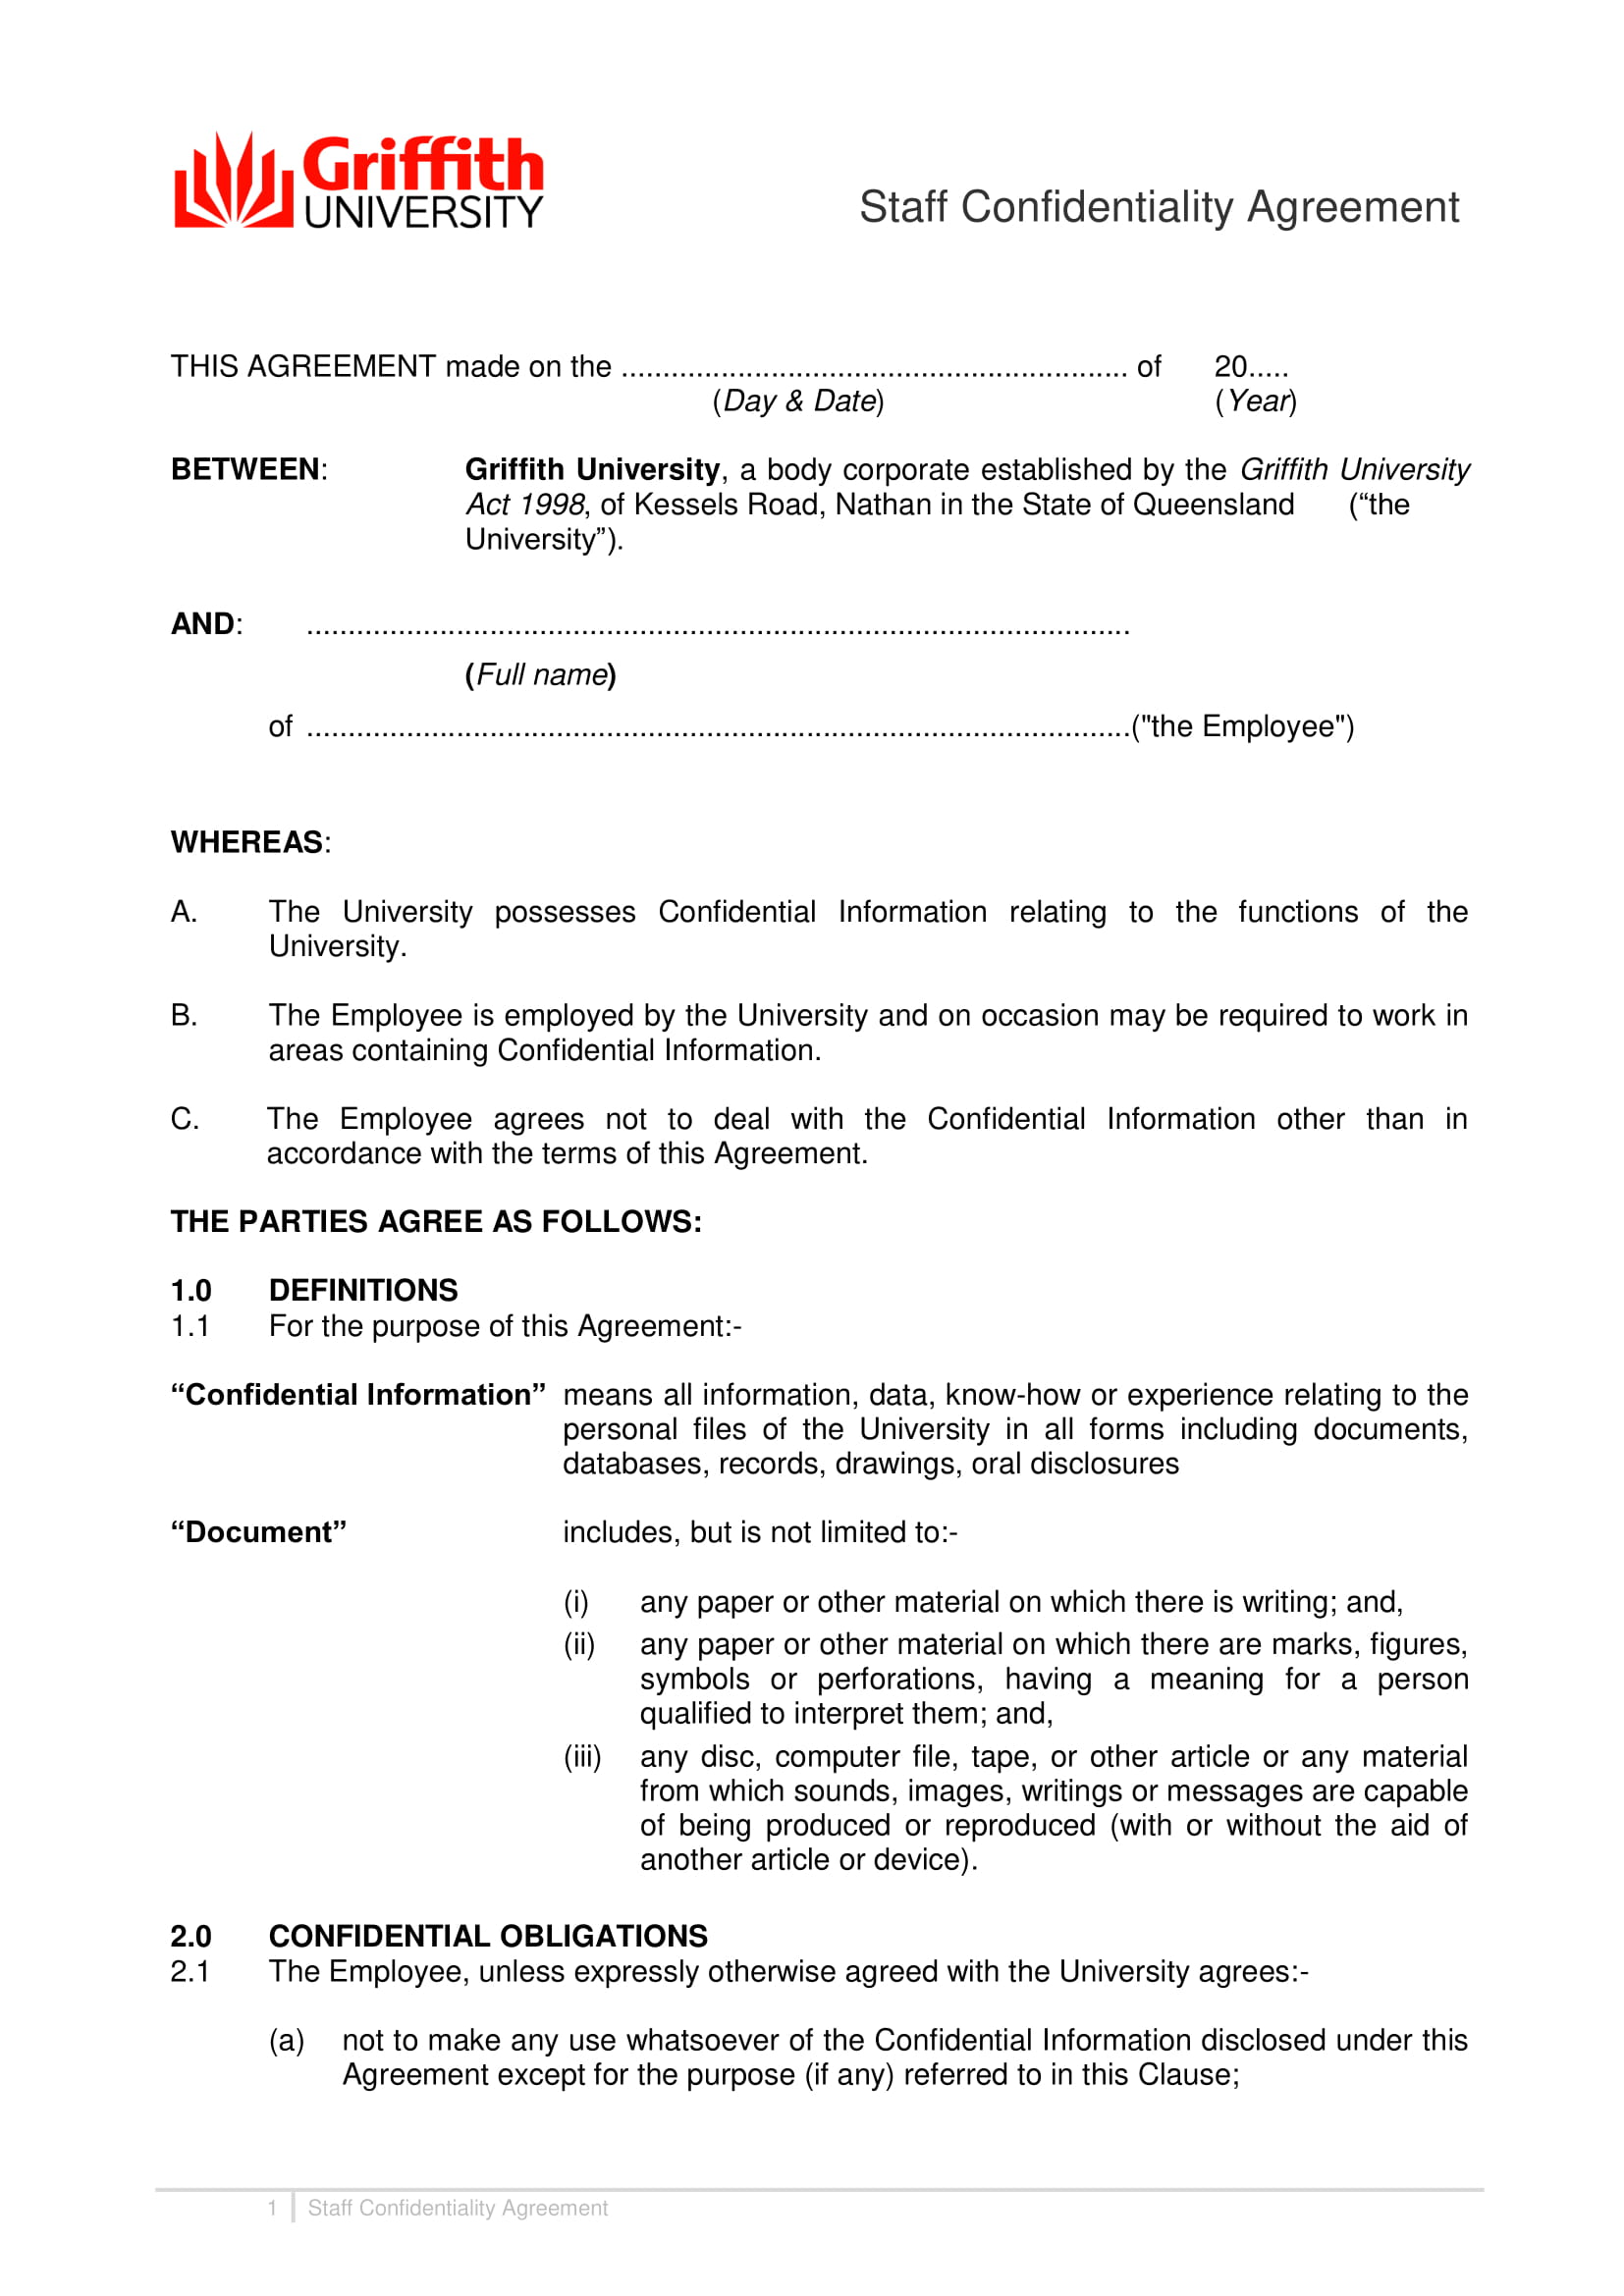 staff confidentiality agreement form 1